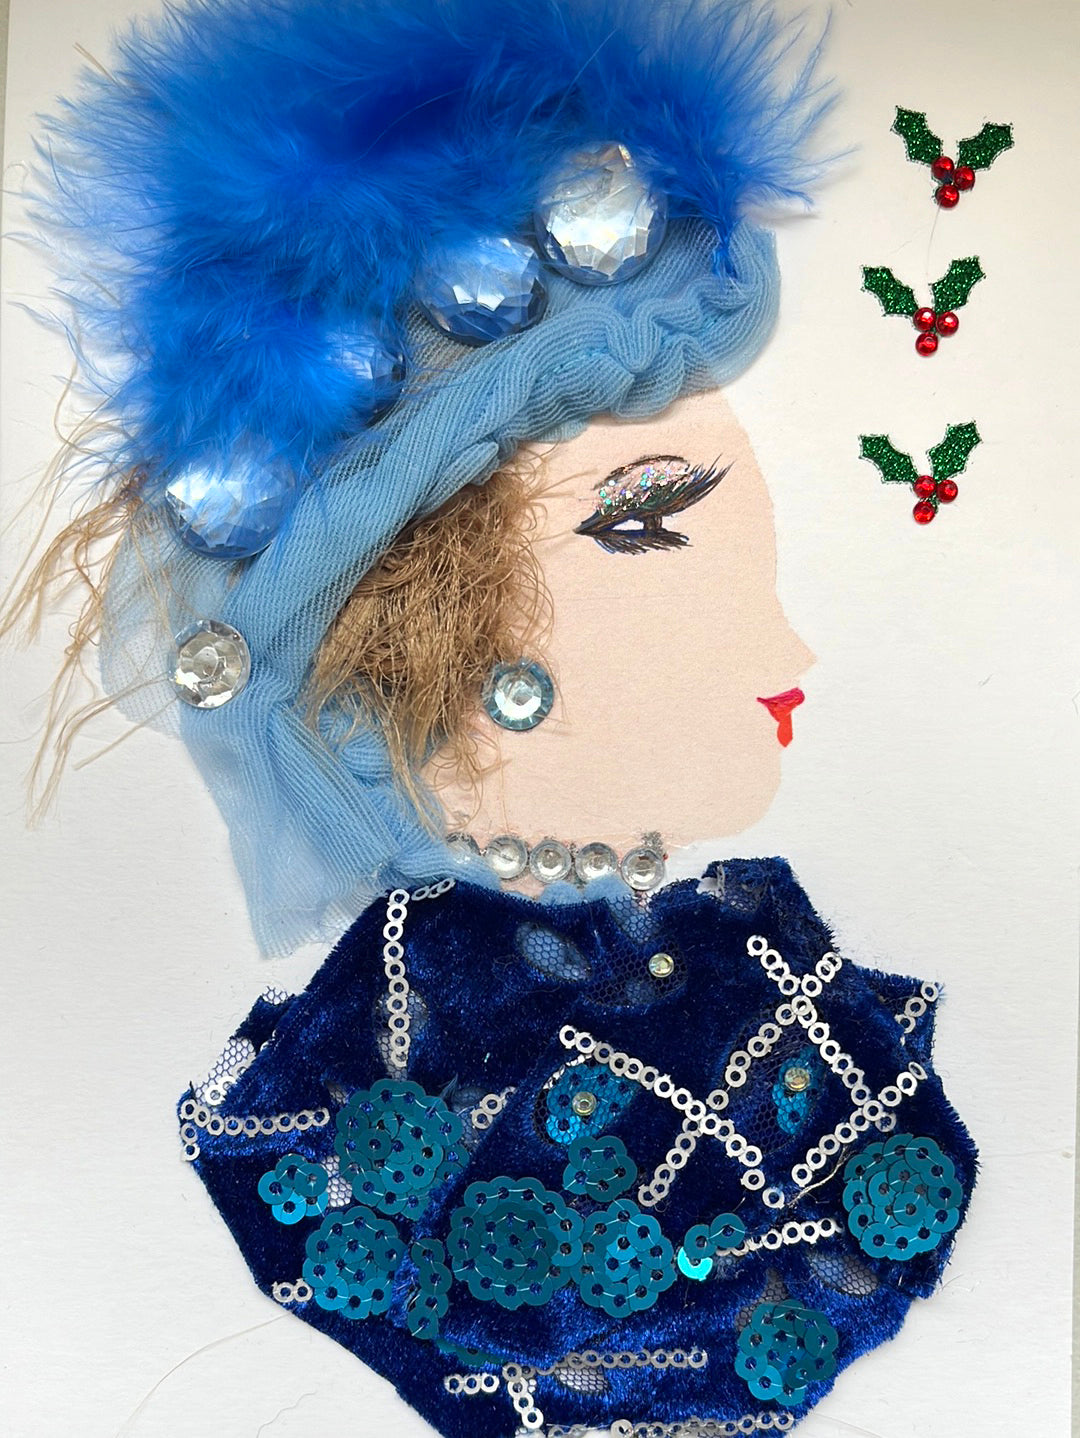 This card has been given the name Adaya. Adaya wears a dark blue blouse with ocean blue sequin circles on it, and lines of silver sequin. She wears a diamonte gem necklace, and a blue gem earring. In her light blonde hair she wears a blue feathery headdress with large blue gems in it. In the righthand corner, there is mistletoe. A part of what I sell is not just my cards but the experience of choosing a card as well so visit the website for more options. 